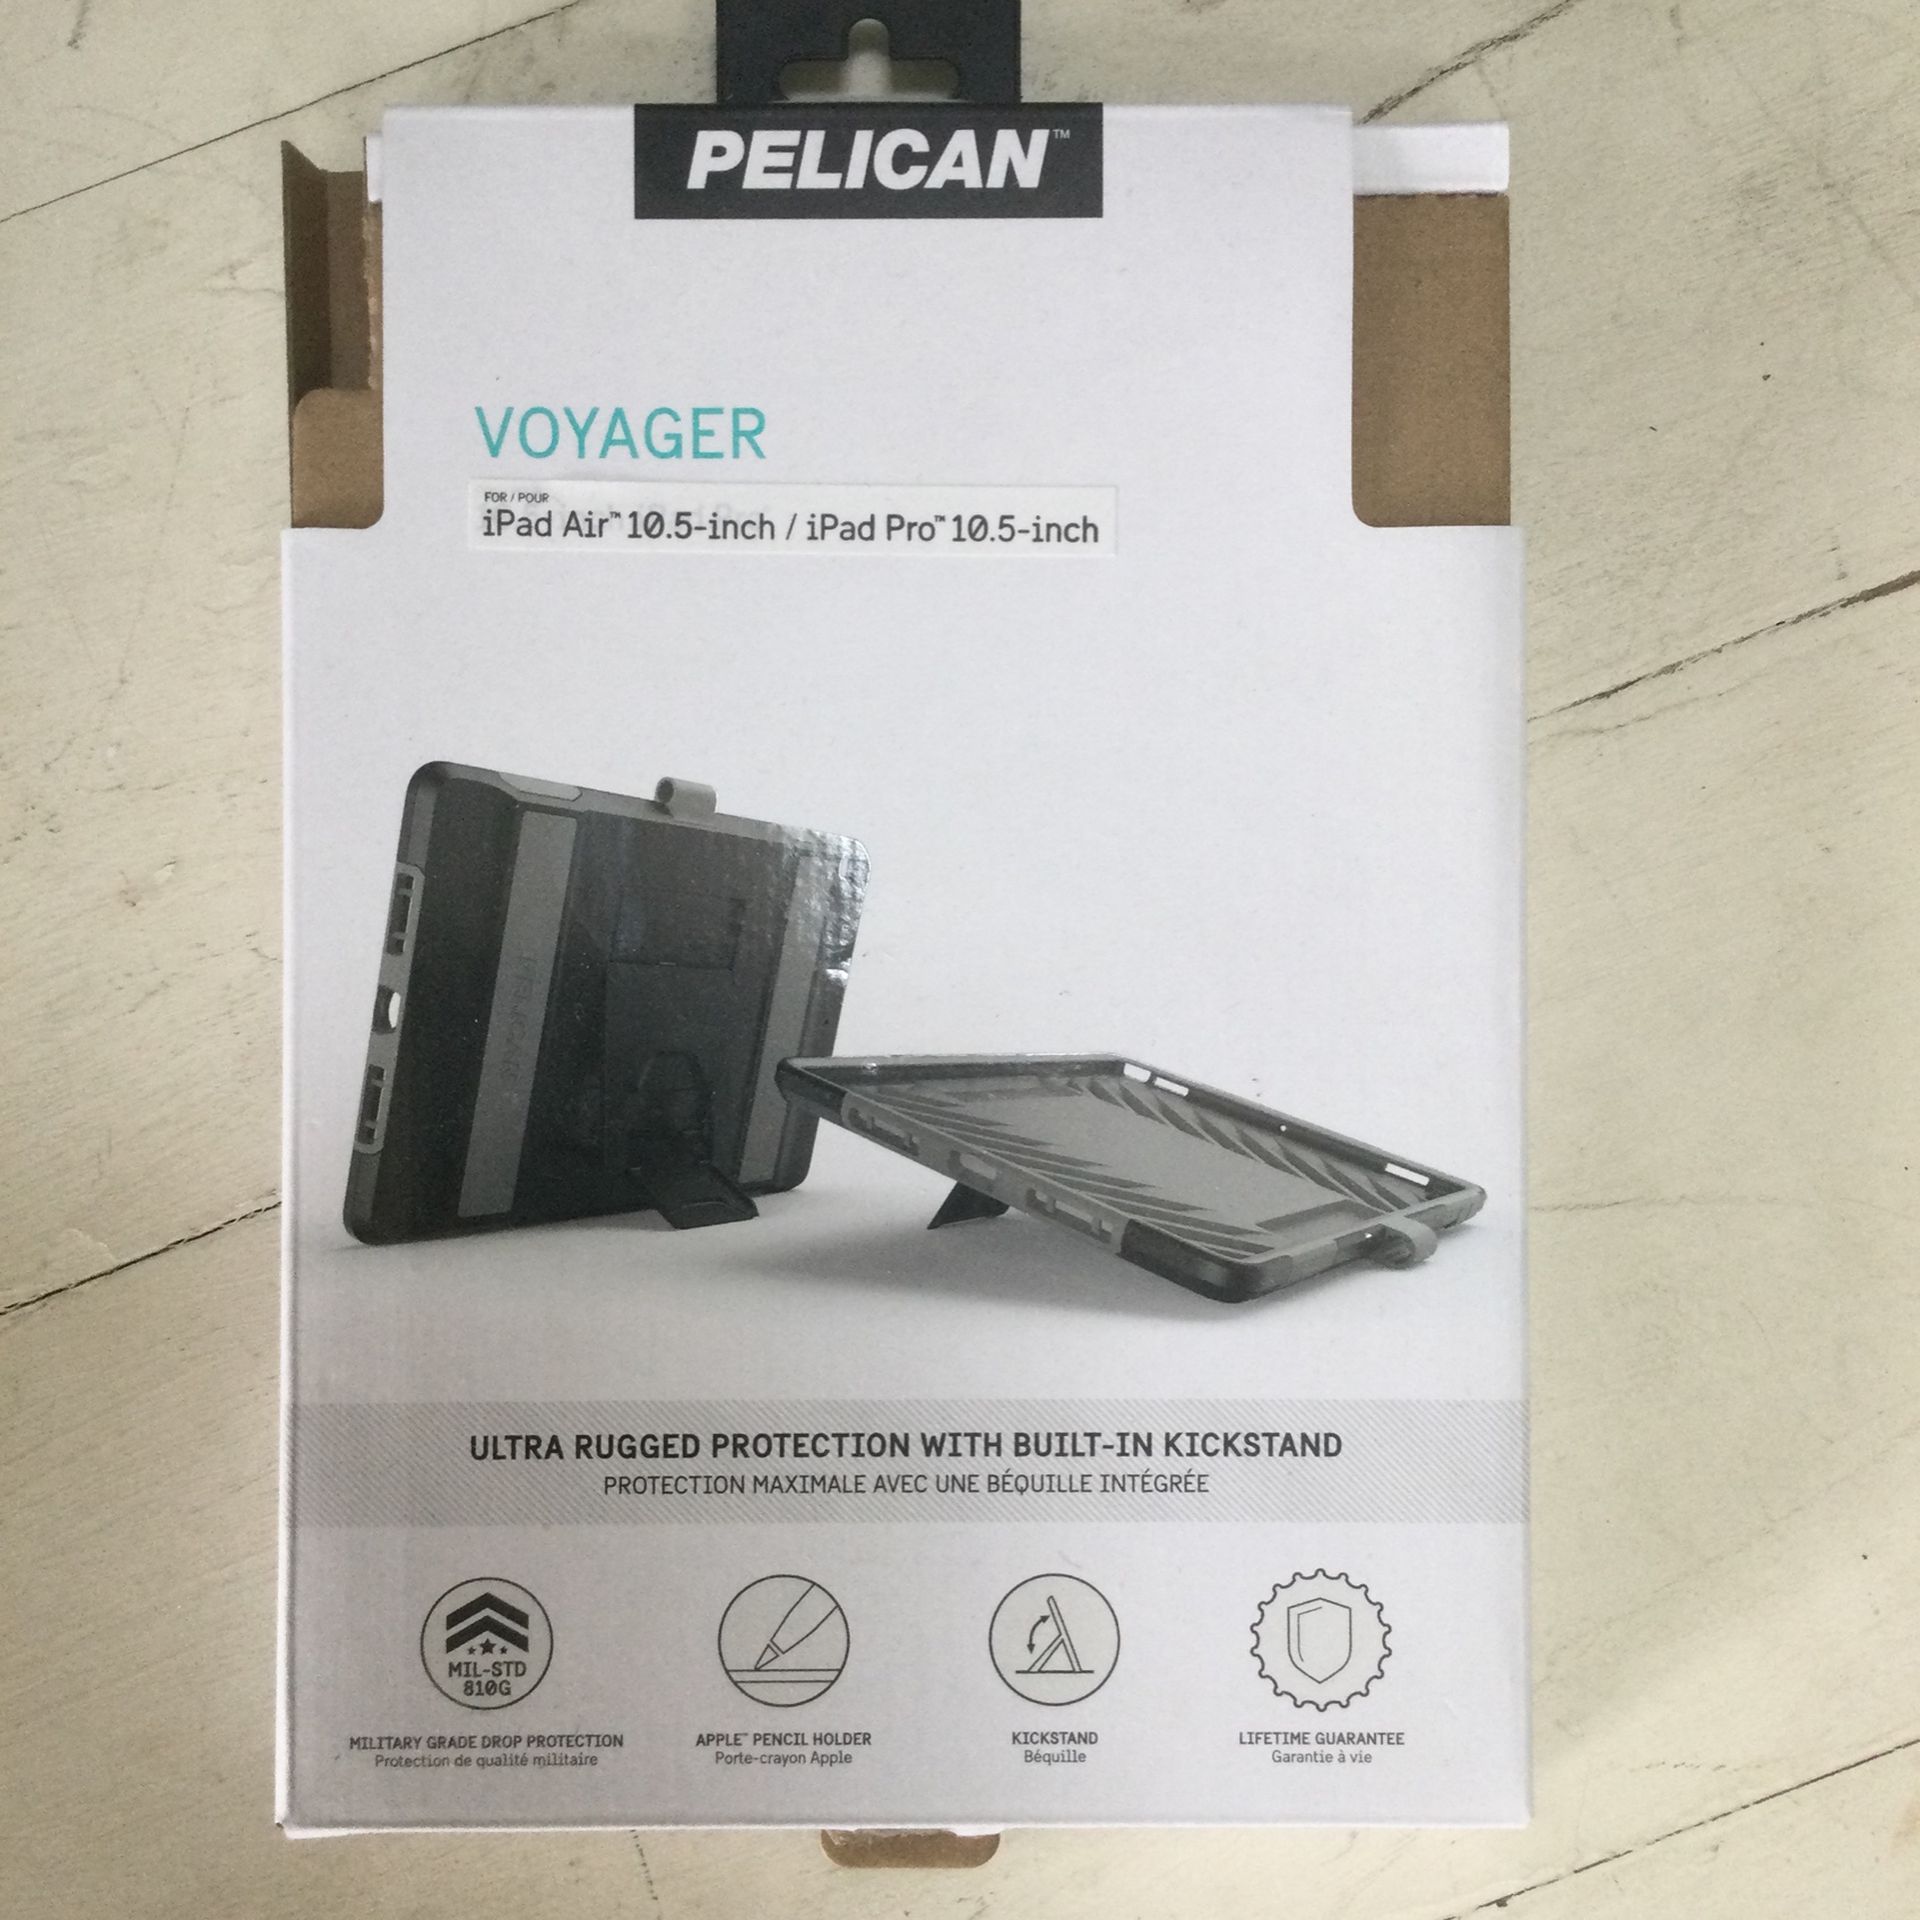 iPad case 10.5” Pelican Voyager For iPad Pro Or iPad Air, NEW IN BOX